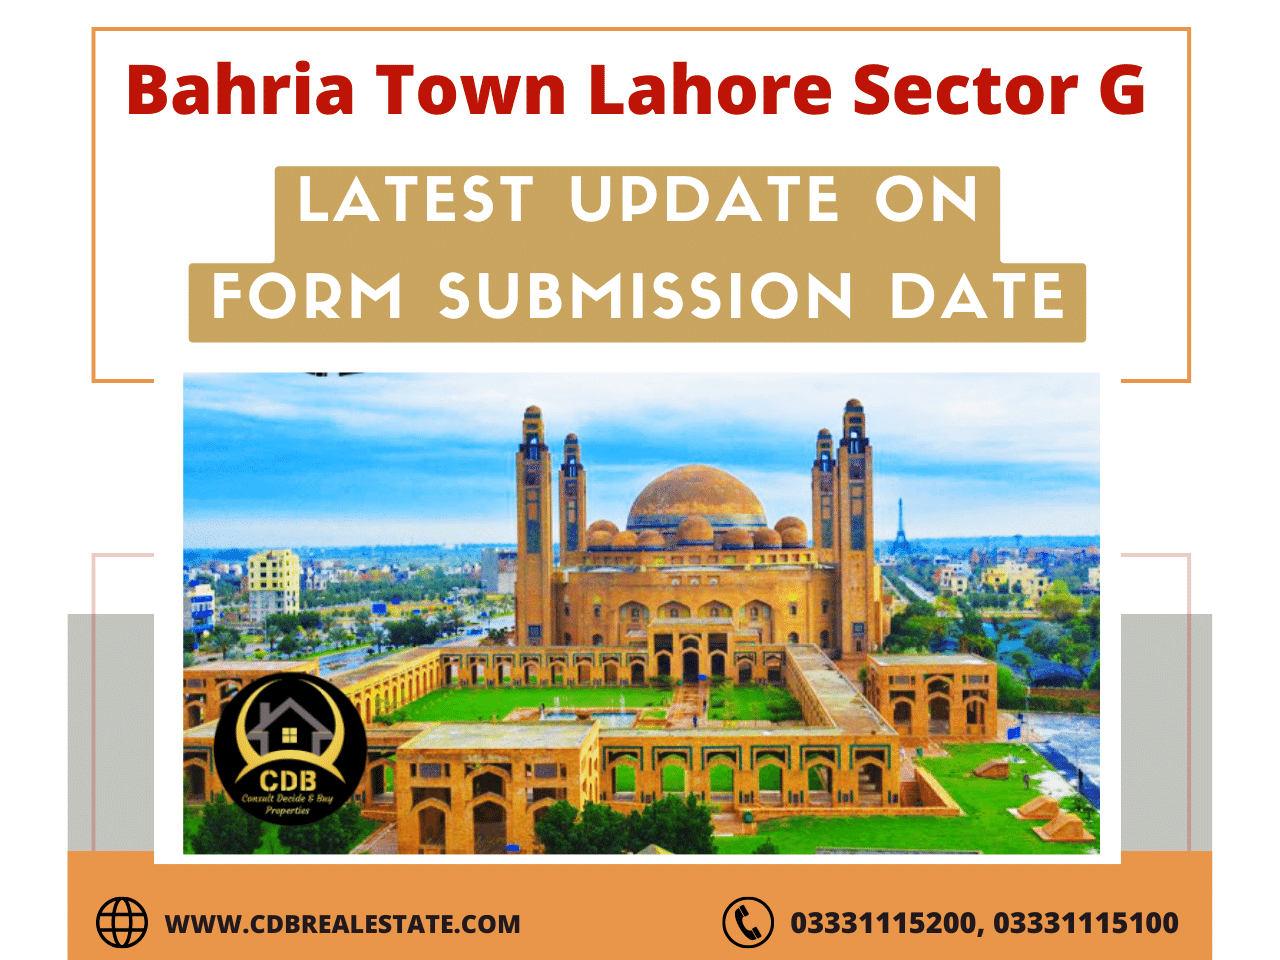 Bahria Town Lahore Sector G Latest Update on Form Submission Date